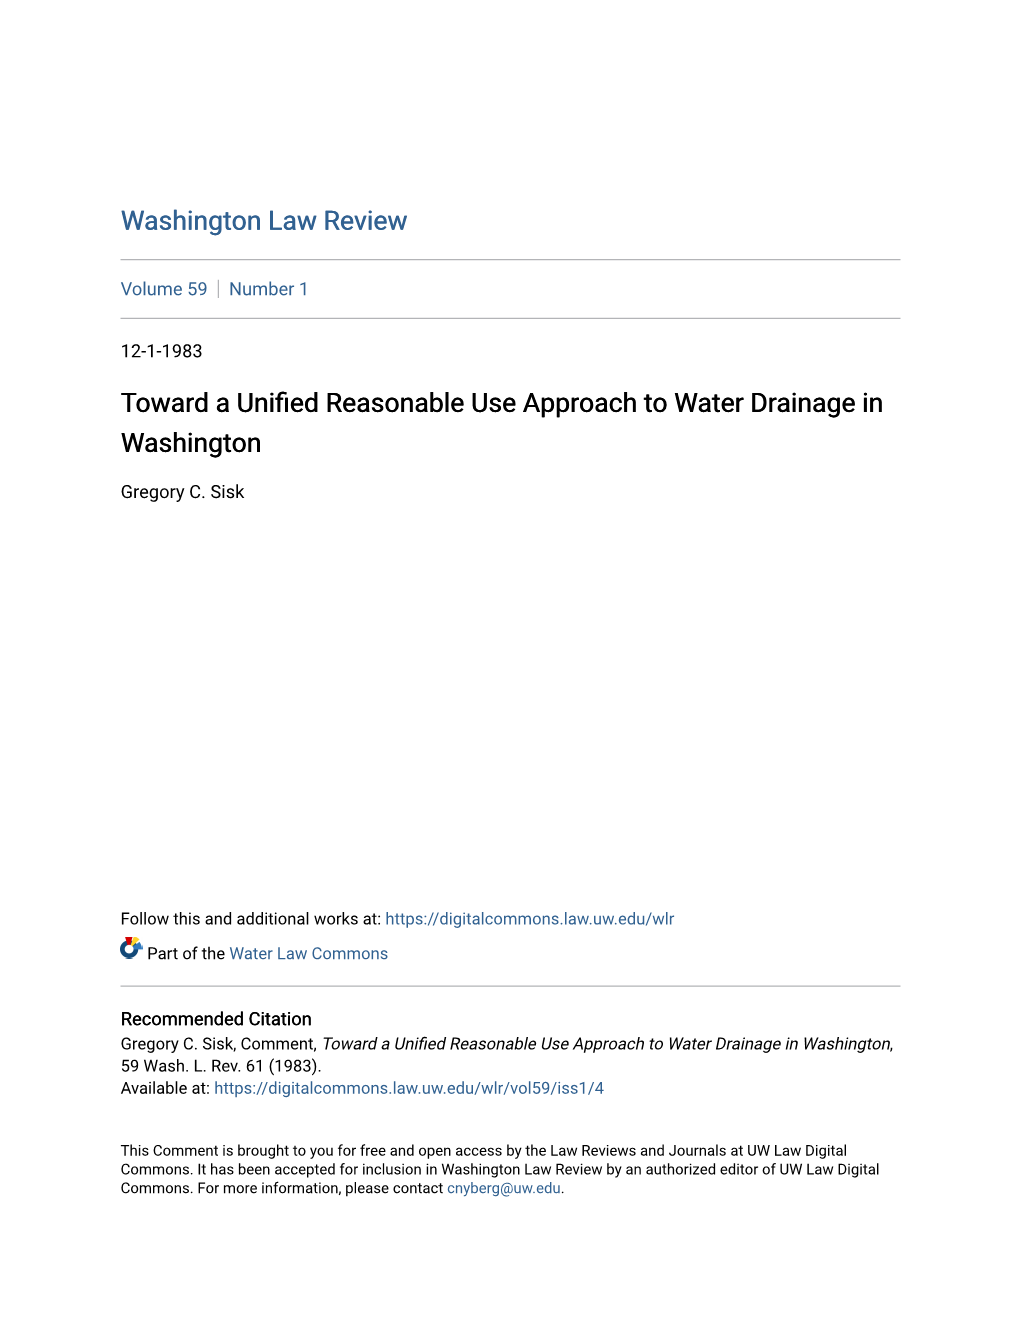 Toward a Unified Reasonable Use Approach to Water Drainage in Washington